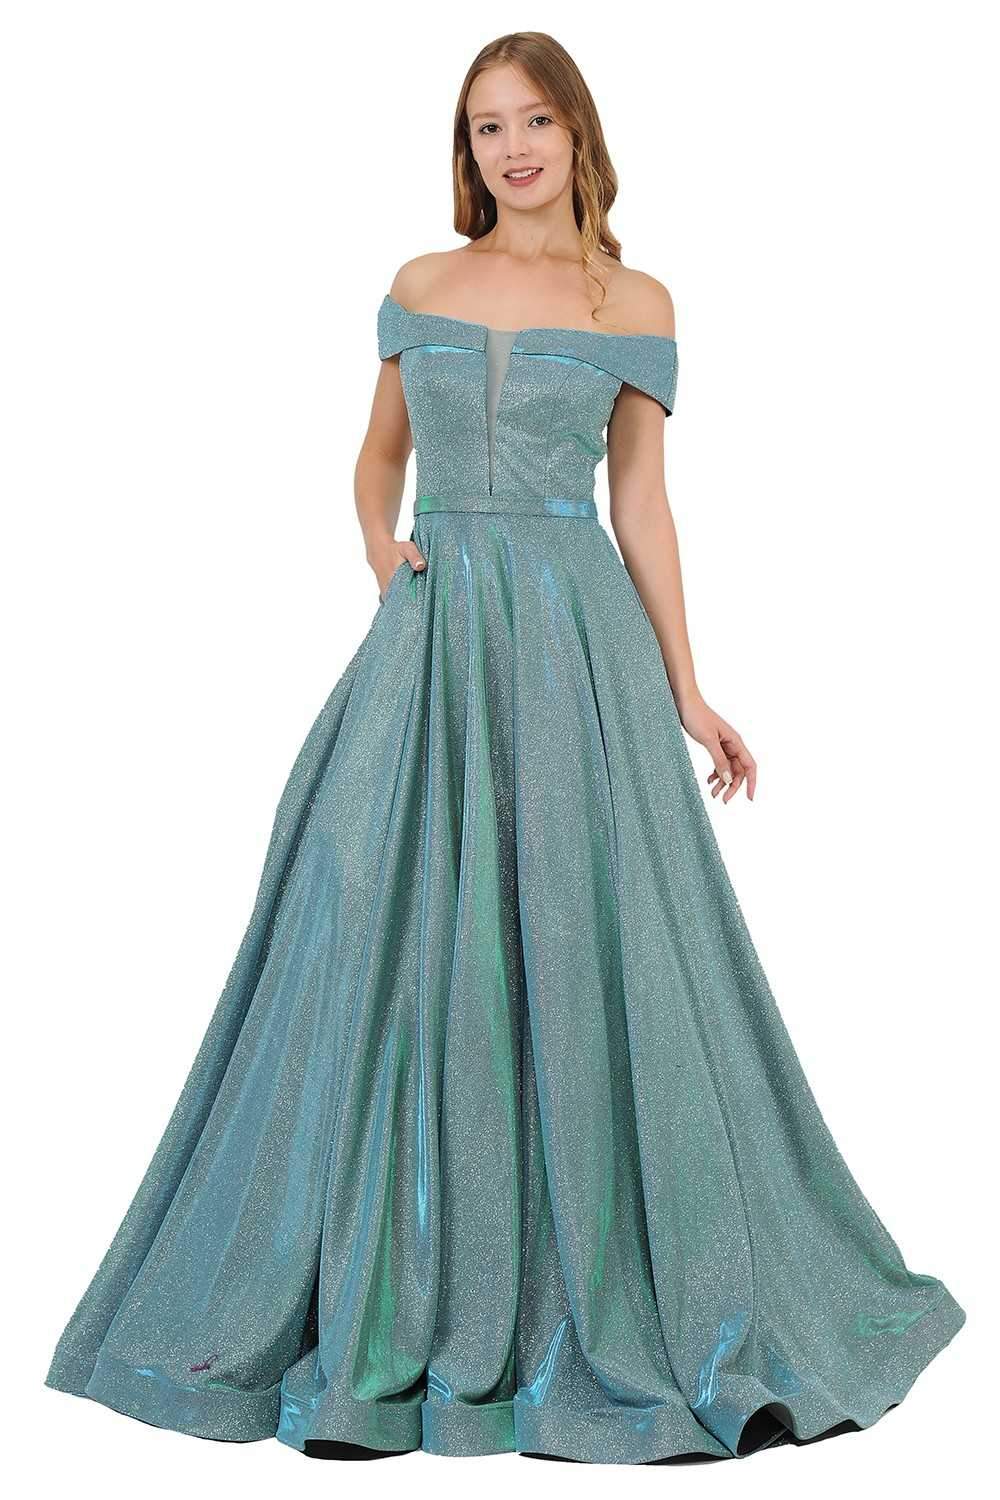 Teal Green Off-Shoulder Long Prom Dress Sheer Cut-Out Bodice